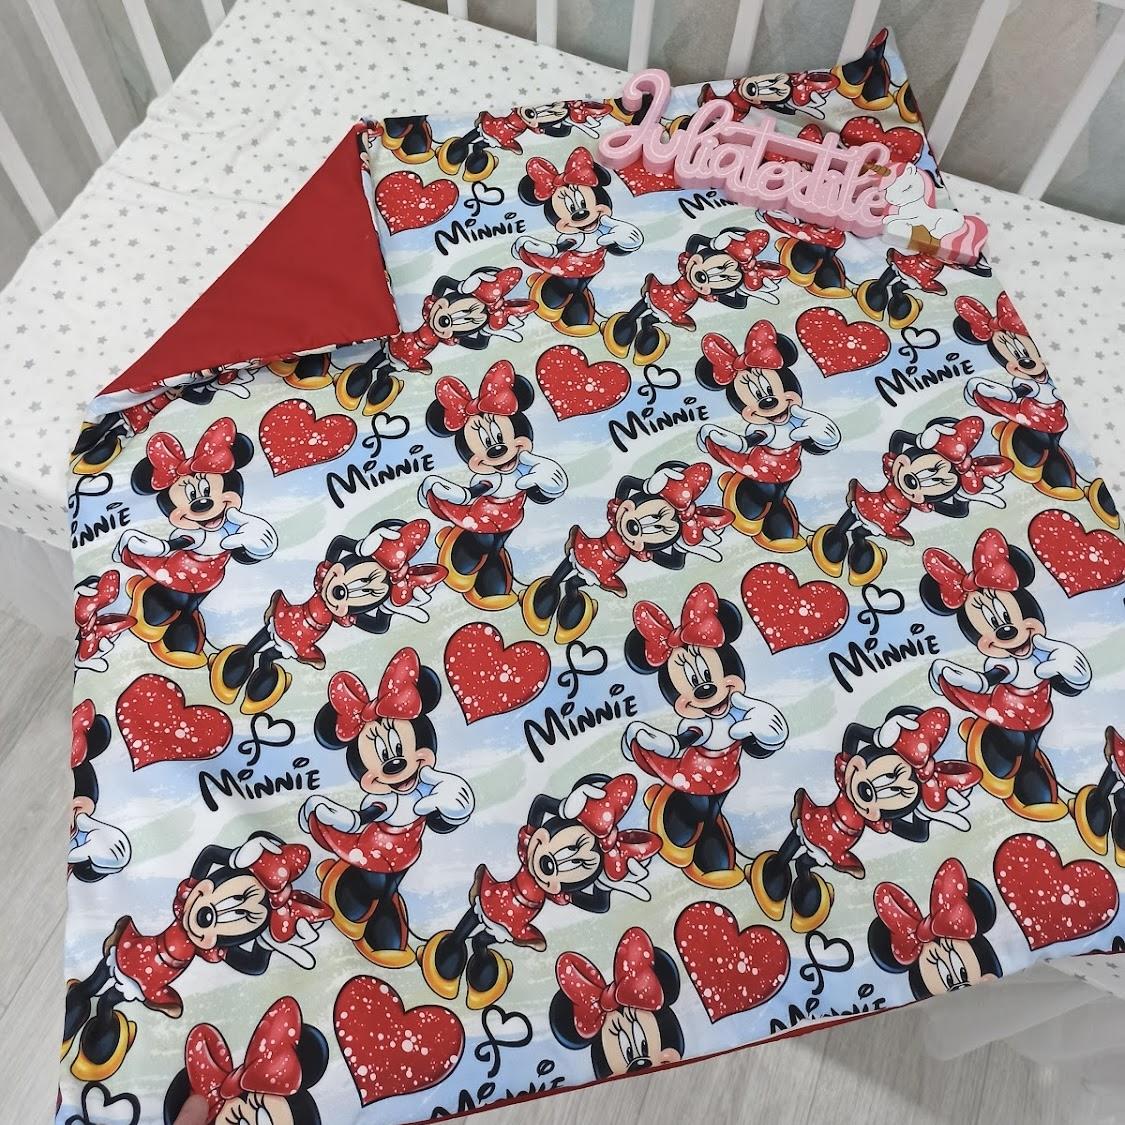 Double-sided blanket with red and white mouse